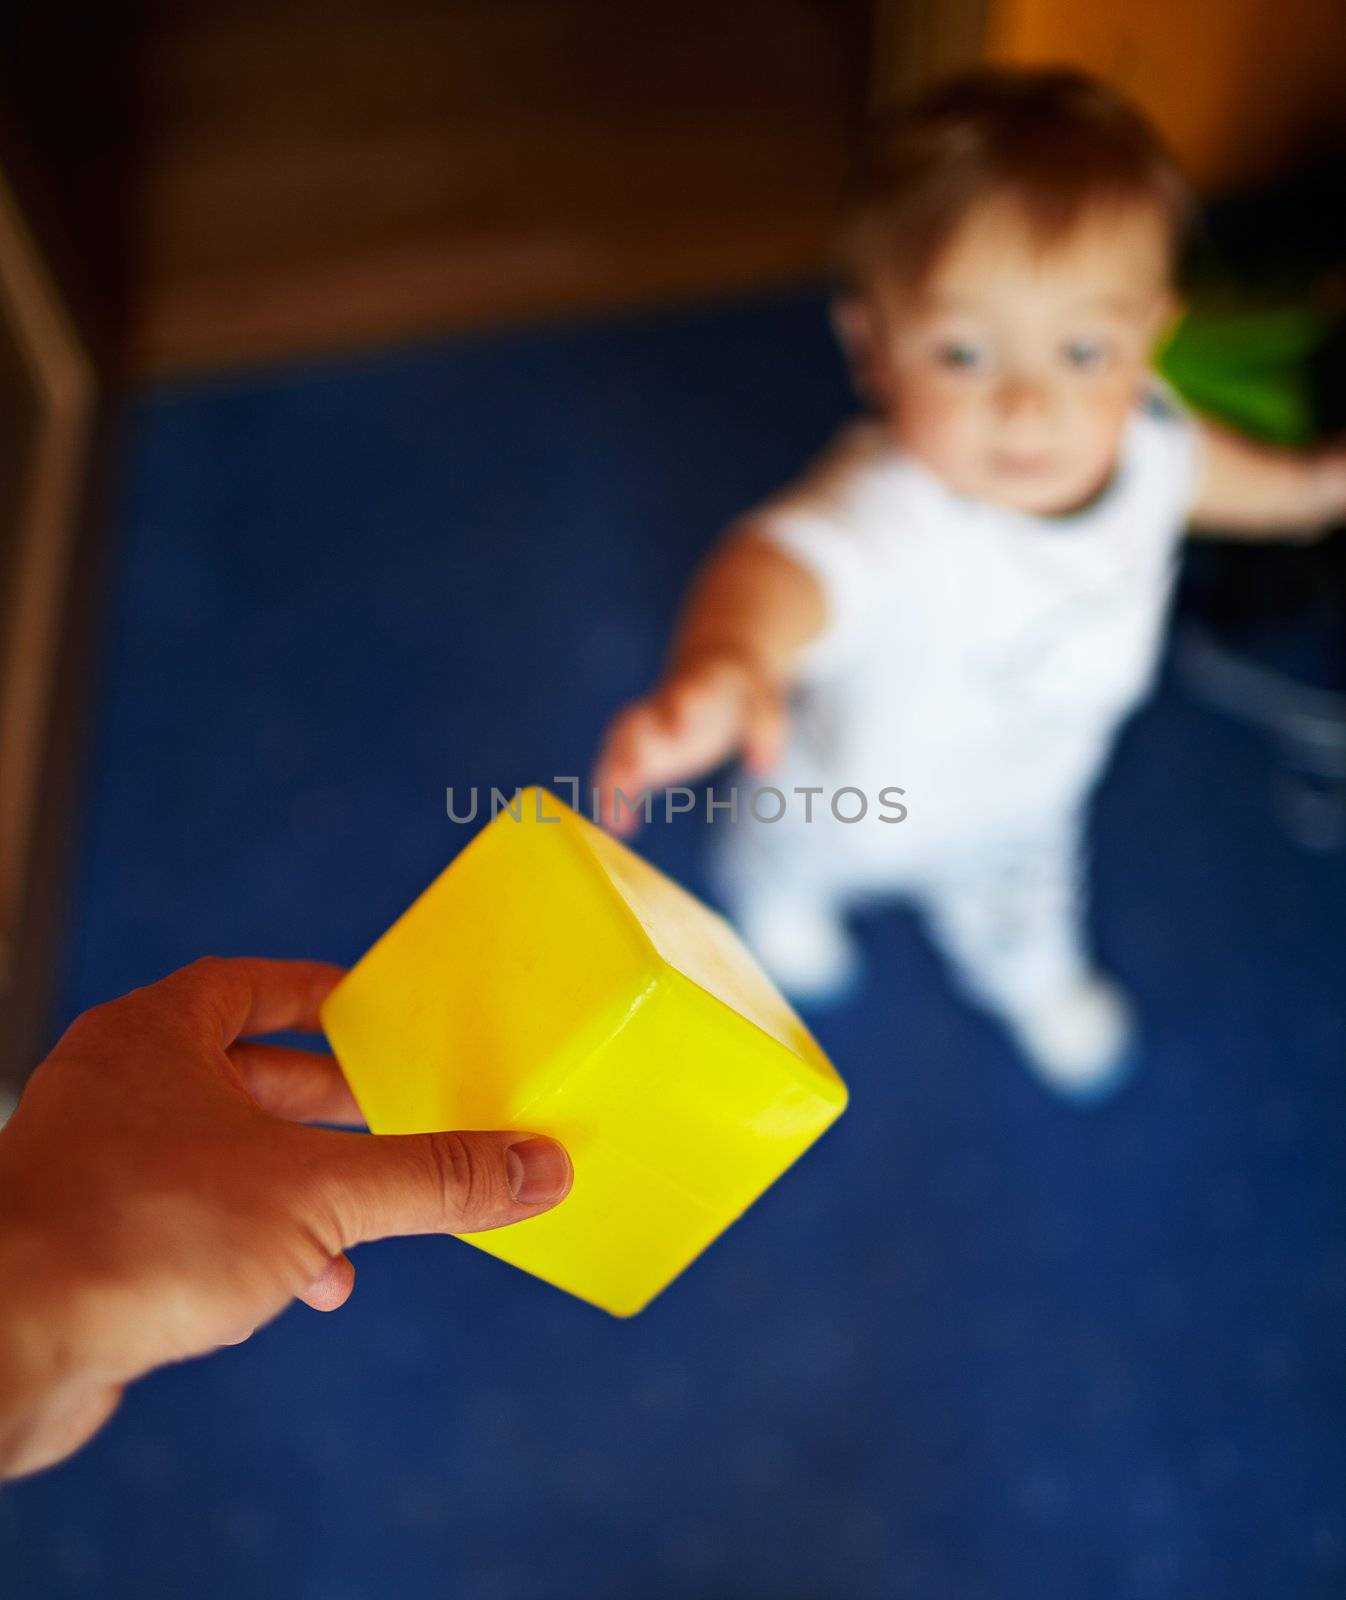 Little handsome boy takes the yellow cube. Shallow dof, focus is on the cube.